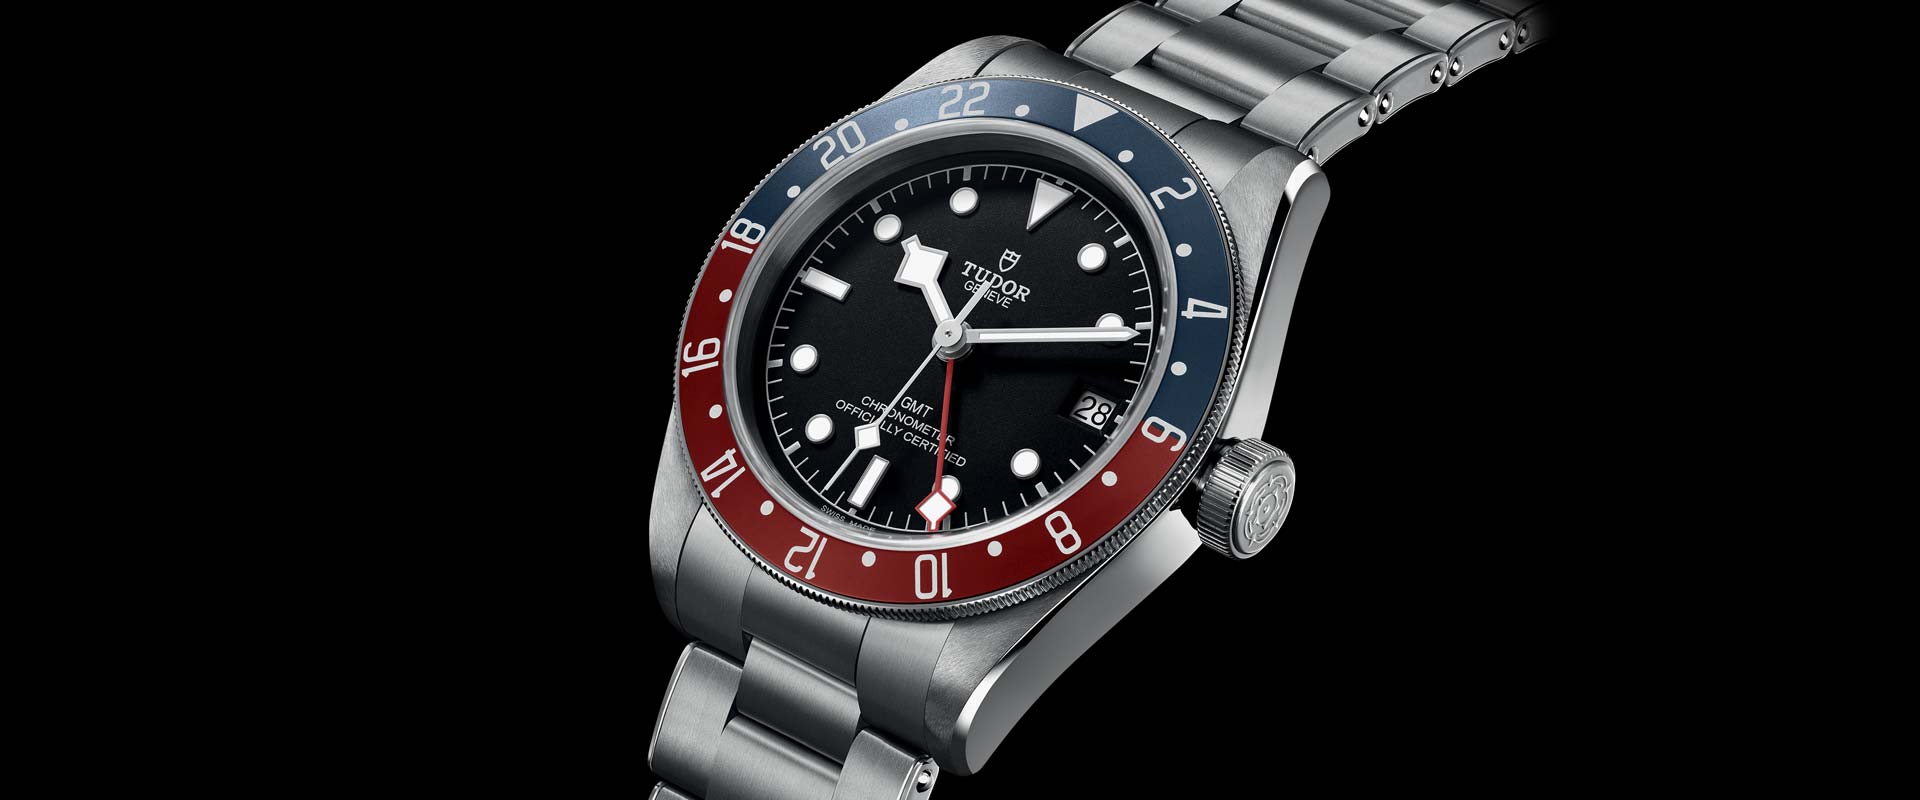 Ones to Watch: Tudor Black Bay GMT watch review